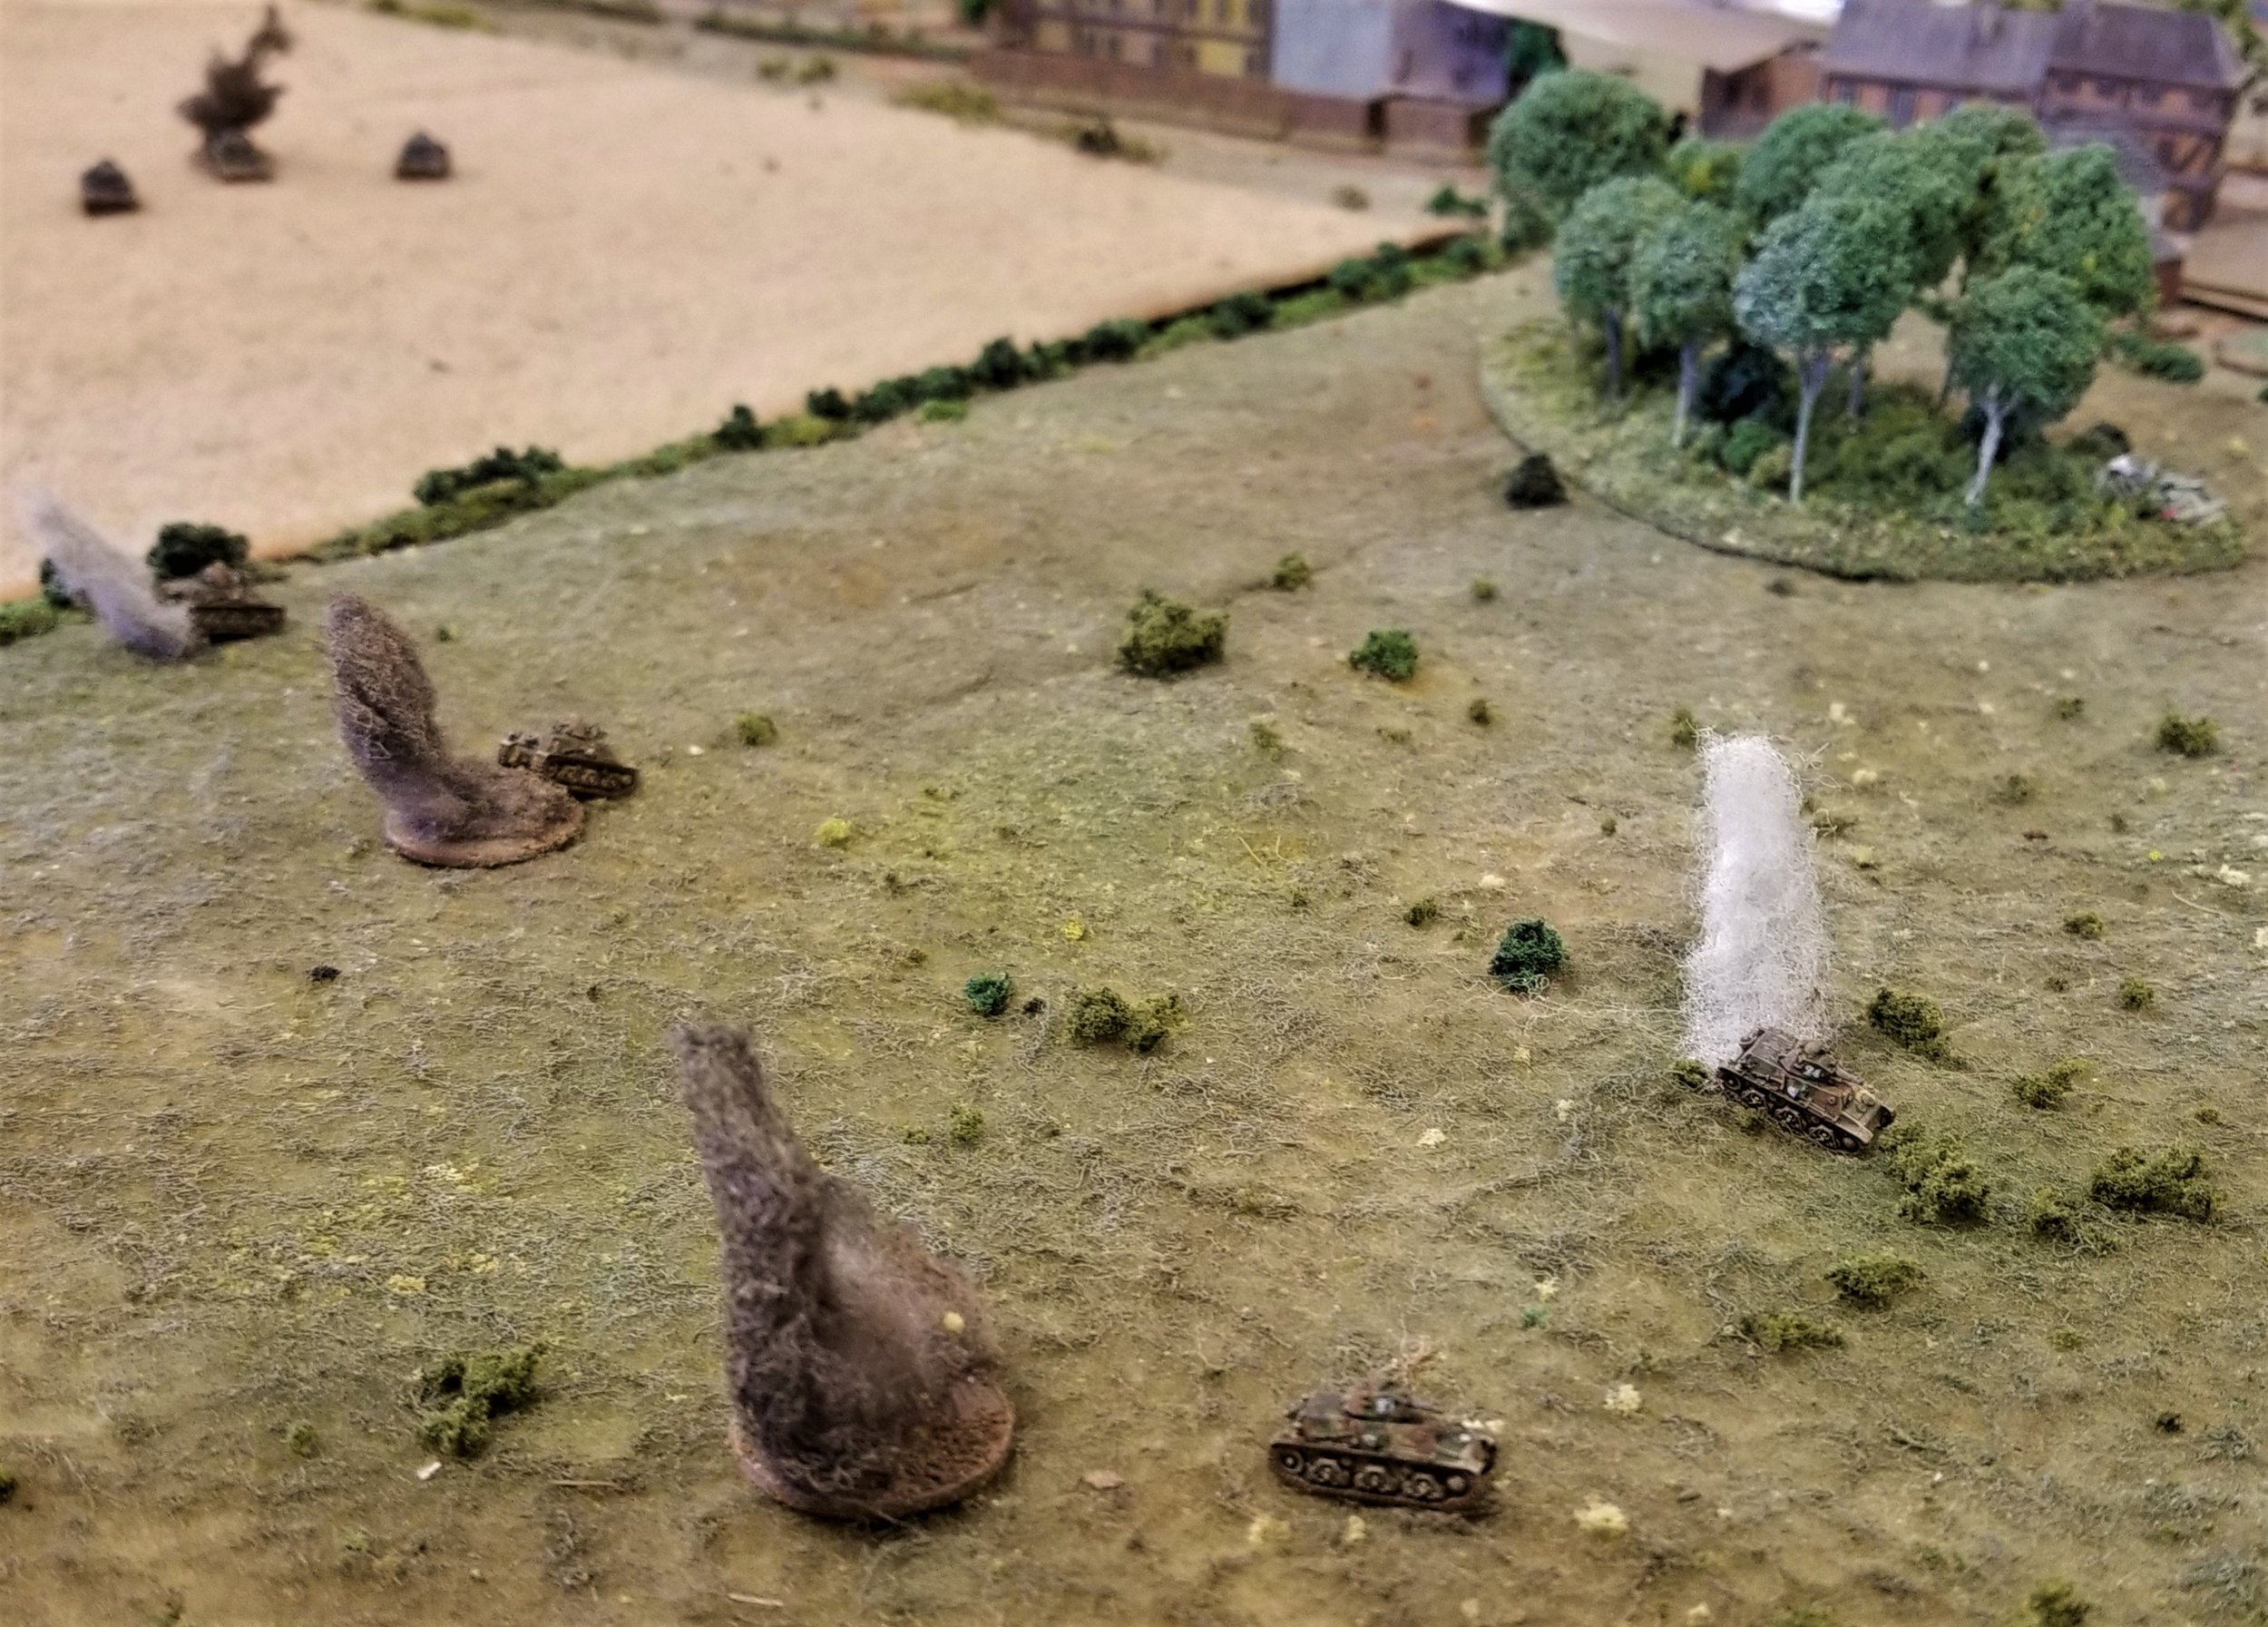 Panzers smacking the H-39s